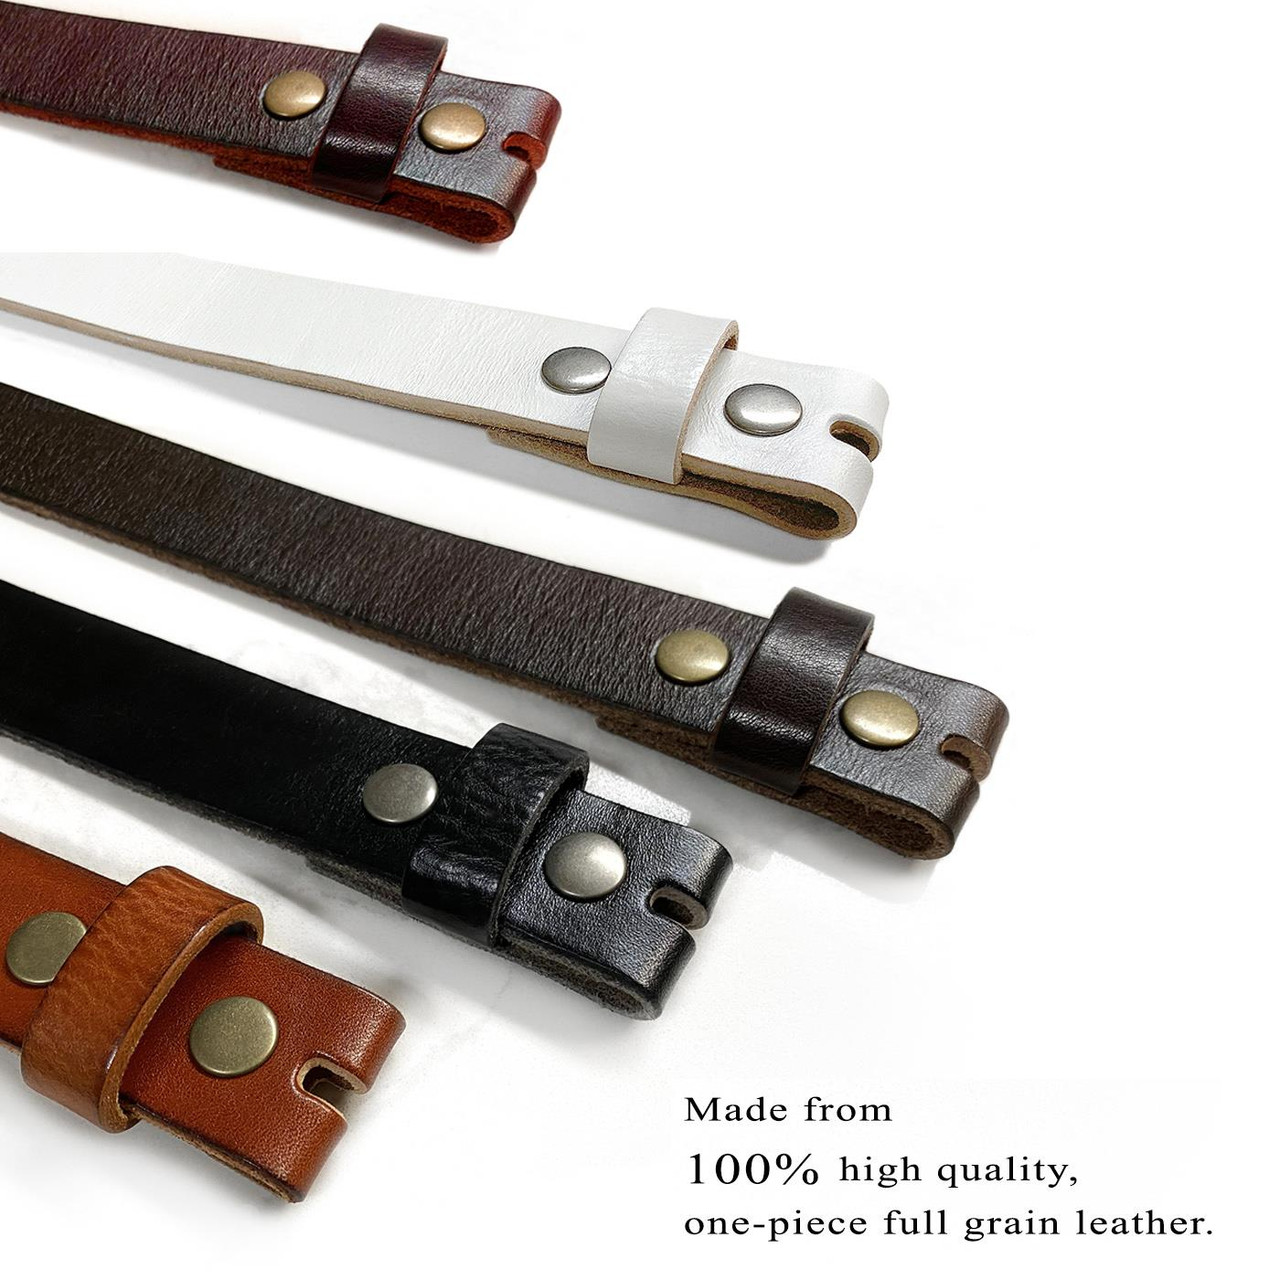 Buy Replacement Belt Straps For Your Favourite Buckle